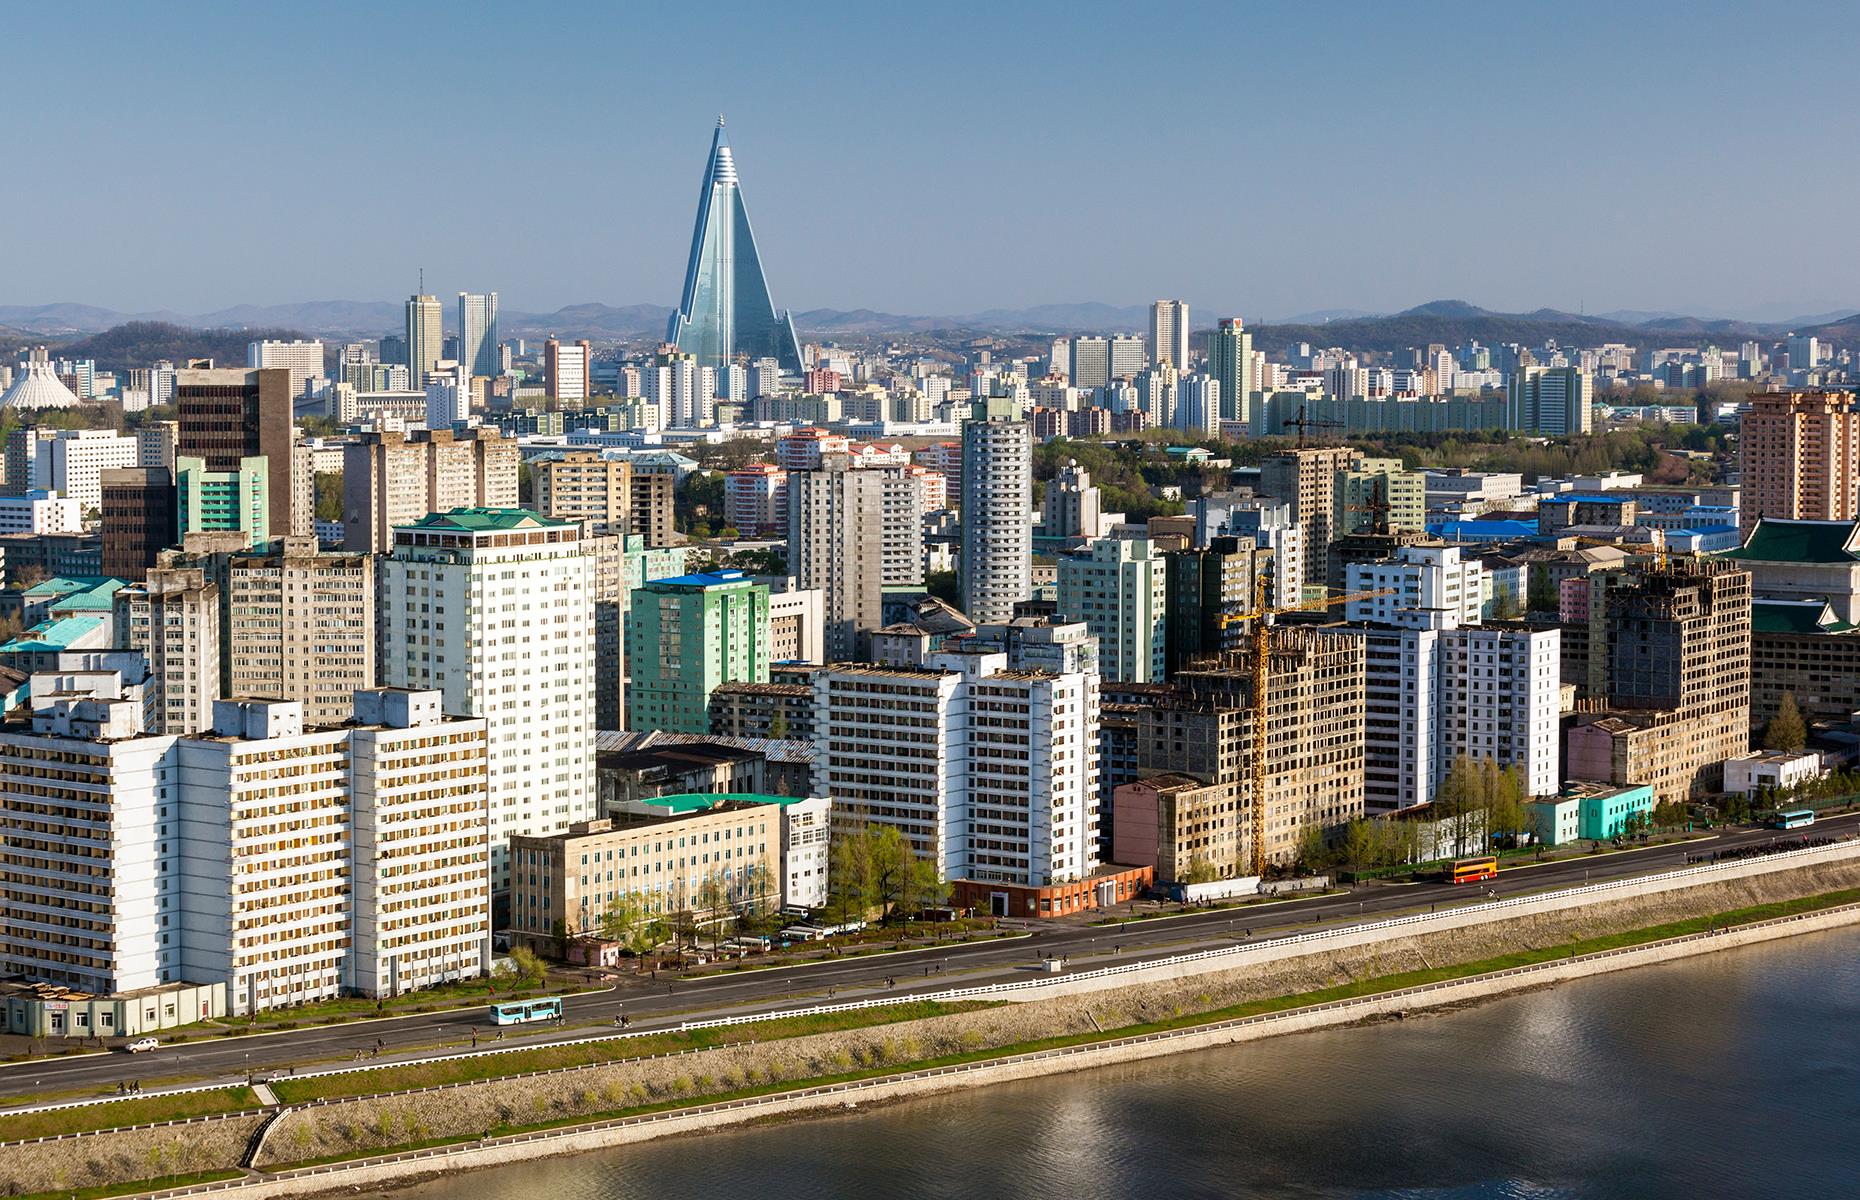 <p>The imposing structure consists of three wings, each of which climb up to the 1,080-foot-high (330m) tip and slope at a 75-degree angle. However, its unusual shape is not a thought-through design feature; the North Koreans didn't have the advanced construction materials used in most modern skyscrapers and instead relied on reinforced concrete, so physics partially dictated the building's form. To achieve the intended height, there had to be a large base and a tapered top to support the enormous weight of the building.</p>